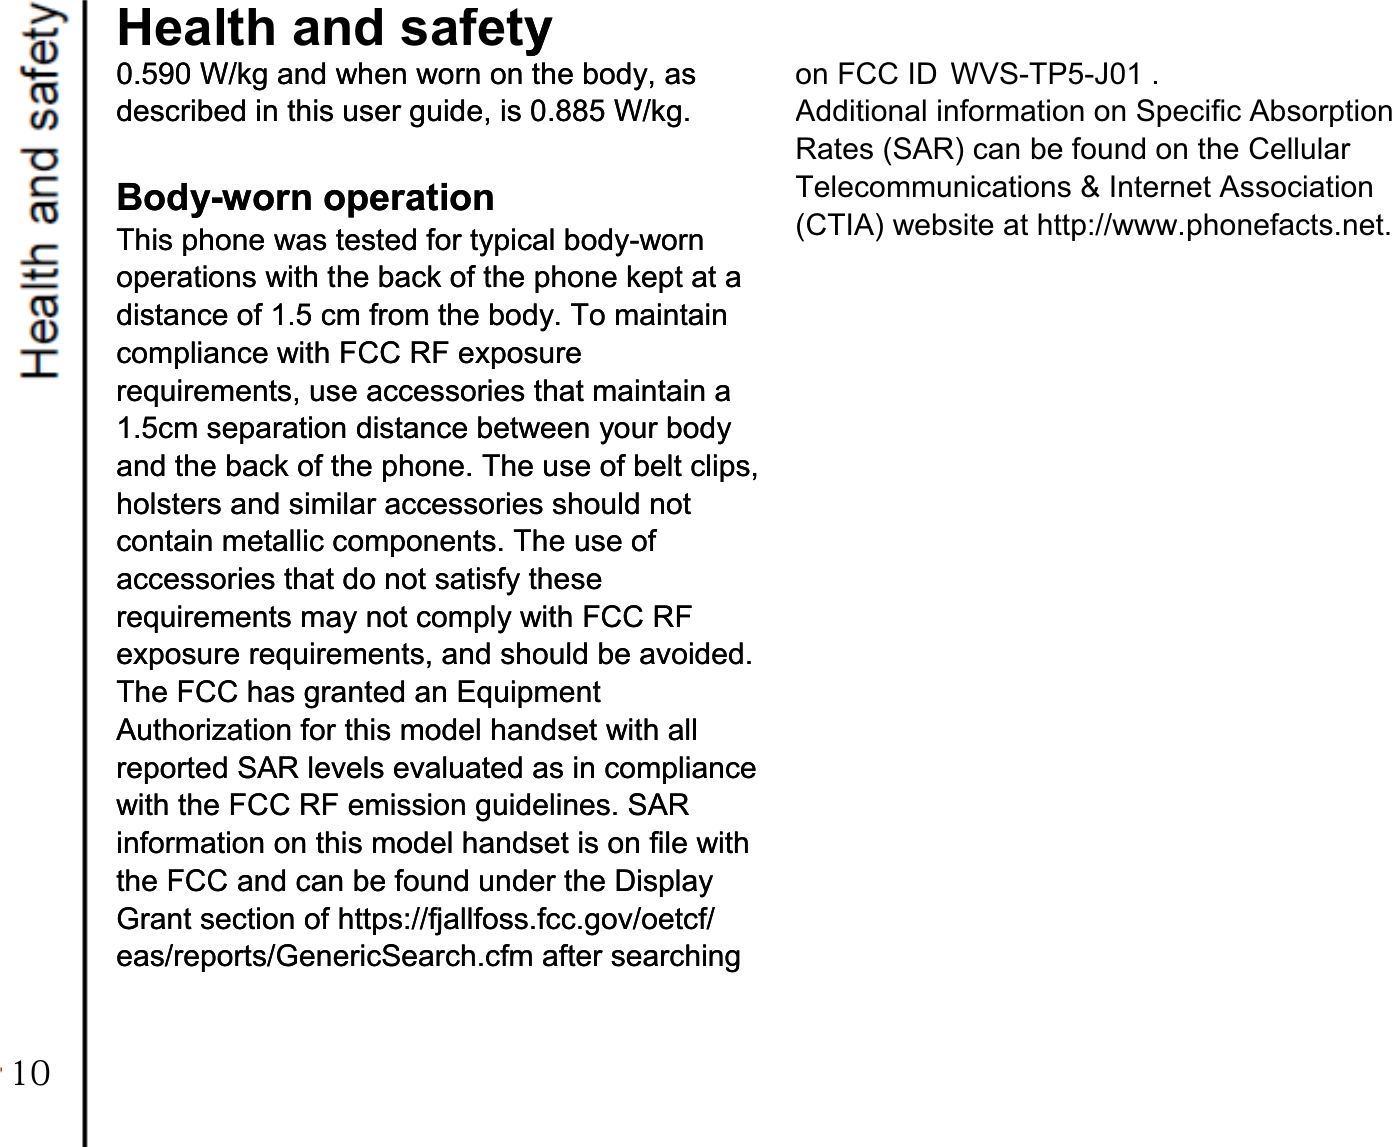 on FCC ID WVS-TP5-J01 . Additional information on Specific Absorption Rates (SAR) can be found on the Cellular Telecommunications &amp; Internet Association (CTIA) website at http://www.phonefacts.net.Health and safetyy0.590 W/kg and when worn on the body, as 0.590 W/kg and when worn on the body, as described in this user guide, is 0.885 W/kg. described in this user guide, is 0.885 W/kg.   Body-worn operation Body-worn operation This phone was tested for typical body-worn This phone was tested for typical body-worn operations with the back of the phone kept at a operations with the back of the phone kept at a distance of 1.5 cm from the body. To maintain distance of 1.5 cm from the body. To maintain compliance with FCC RF exposure compliance with FCC RF exposure requirements, use accessories that maintain a requirements, use accessories that maintain a 1.5cm separation distance between your body 1.5cm separation distance between your body and the back of the phone. The use of belt clips, and the back of the phone. The use of belt clips, holsters and similar accessories should not holsters and similar accessories should not contain metallic components. The use of contain metallic components. The use of accessories that do not satisfy these accessories that do not satisfy these requirements may not comply with FCC RF requirements may not comply with FCC RF exposure requirements, and should be avoided. exposure requirements, and should be avoided. The FCC has granted an Equipment The FCC has granted an Equipment Authorization for this model handset with all Authorization for this model handset with all reported SAR levels evaluated as in compliance reported SAR levels evaluated as in compliance with the FCC RF emission guidelines. SAR with the FCC RF emission guidelines. SAR information on this model handset is on file with information on this model handset is on file with the FCC and can be found under the Display the FCC and can be found under the Display Grant section of https://fjallfoss.fcc.gov/oetcf/ Grant section of https://fjallfoss.fcc.gov/oetcf/ eas/reports/GenericSearch.cfm after searching eas/reports/GenericSearch.cfm after searching   10